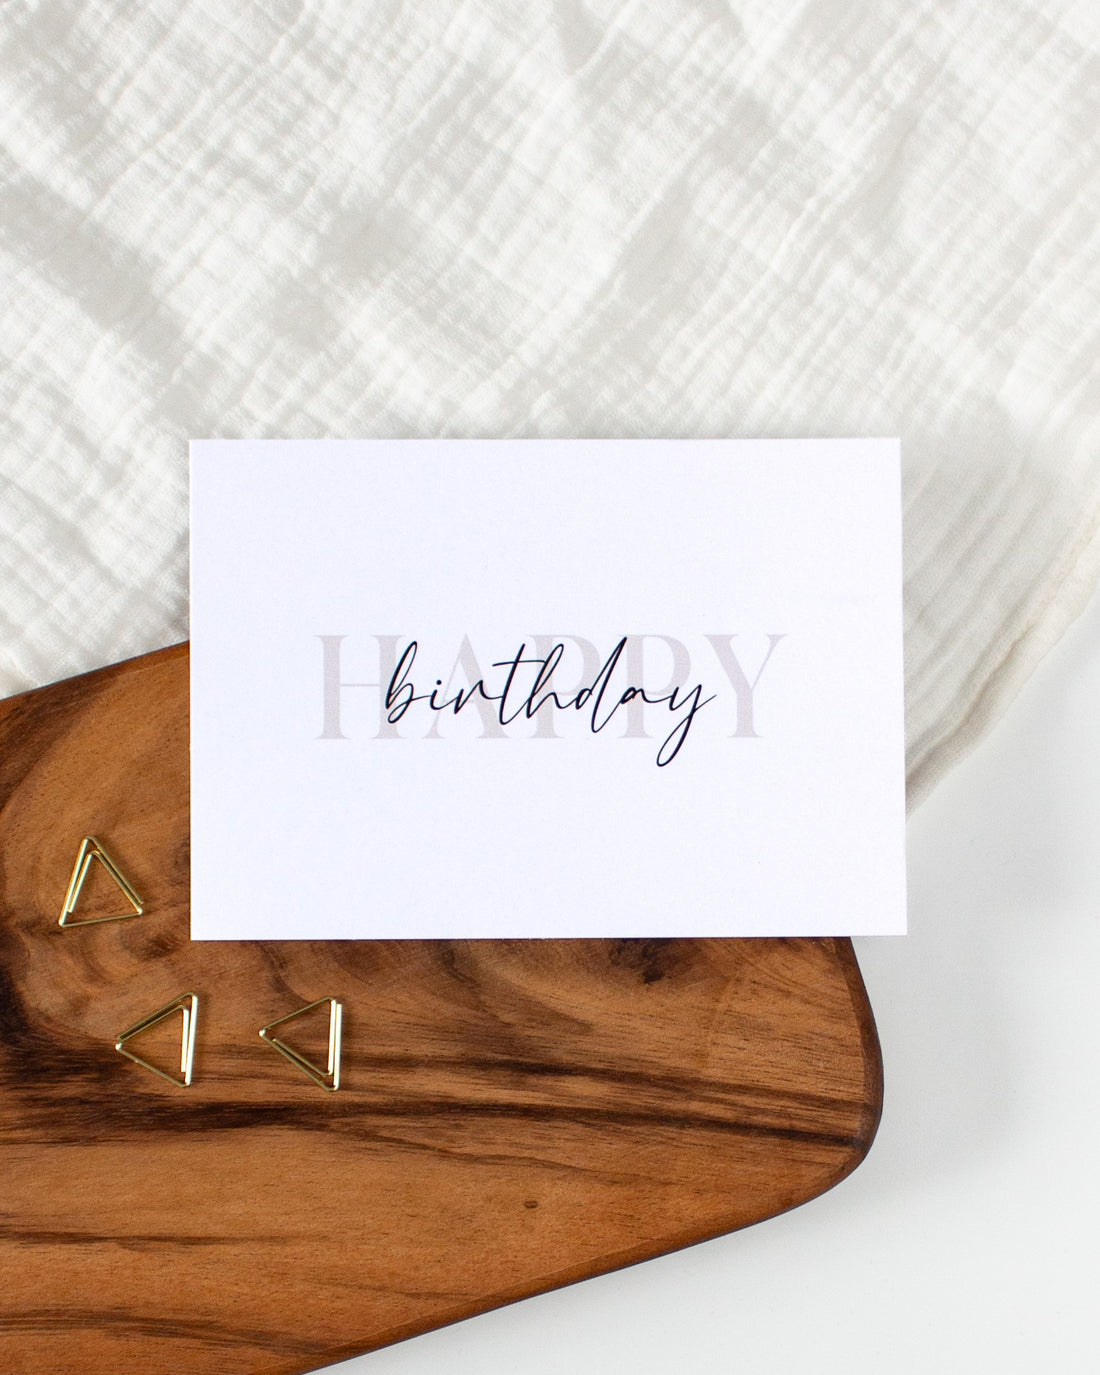 A postcard laying on a wooden board with some golden triangle paperclips and a white cloth in the background. The postcard design consists of bold beige letters saying &quot;Happy&quot; with black cursive writing on top saying &quot;birthday&quot;.